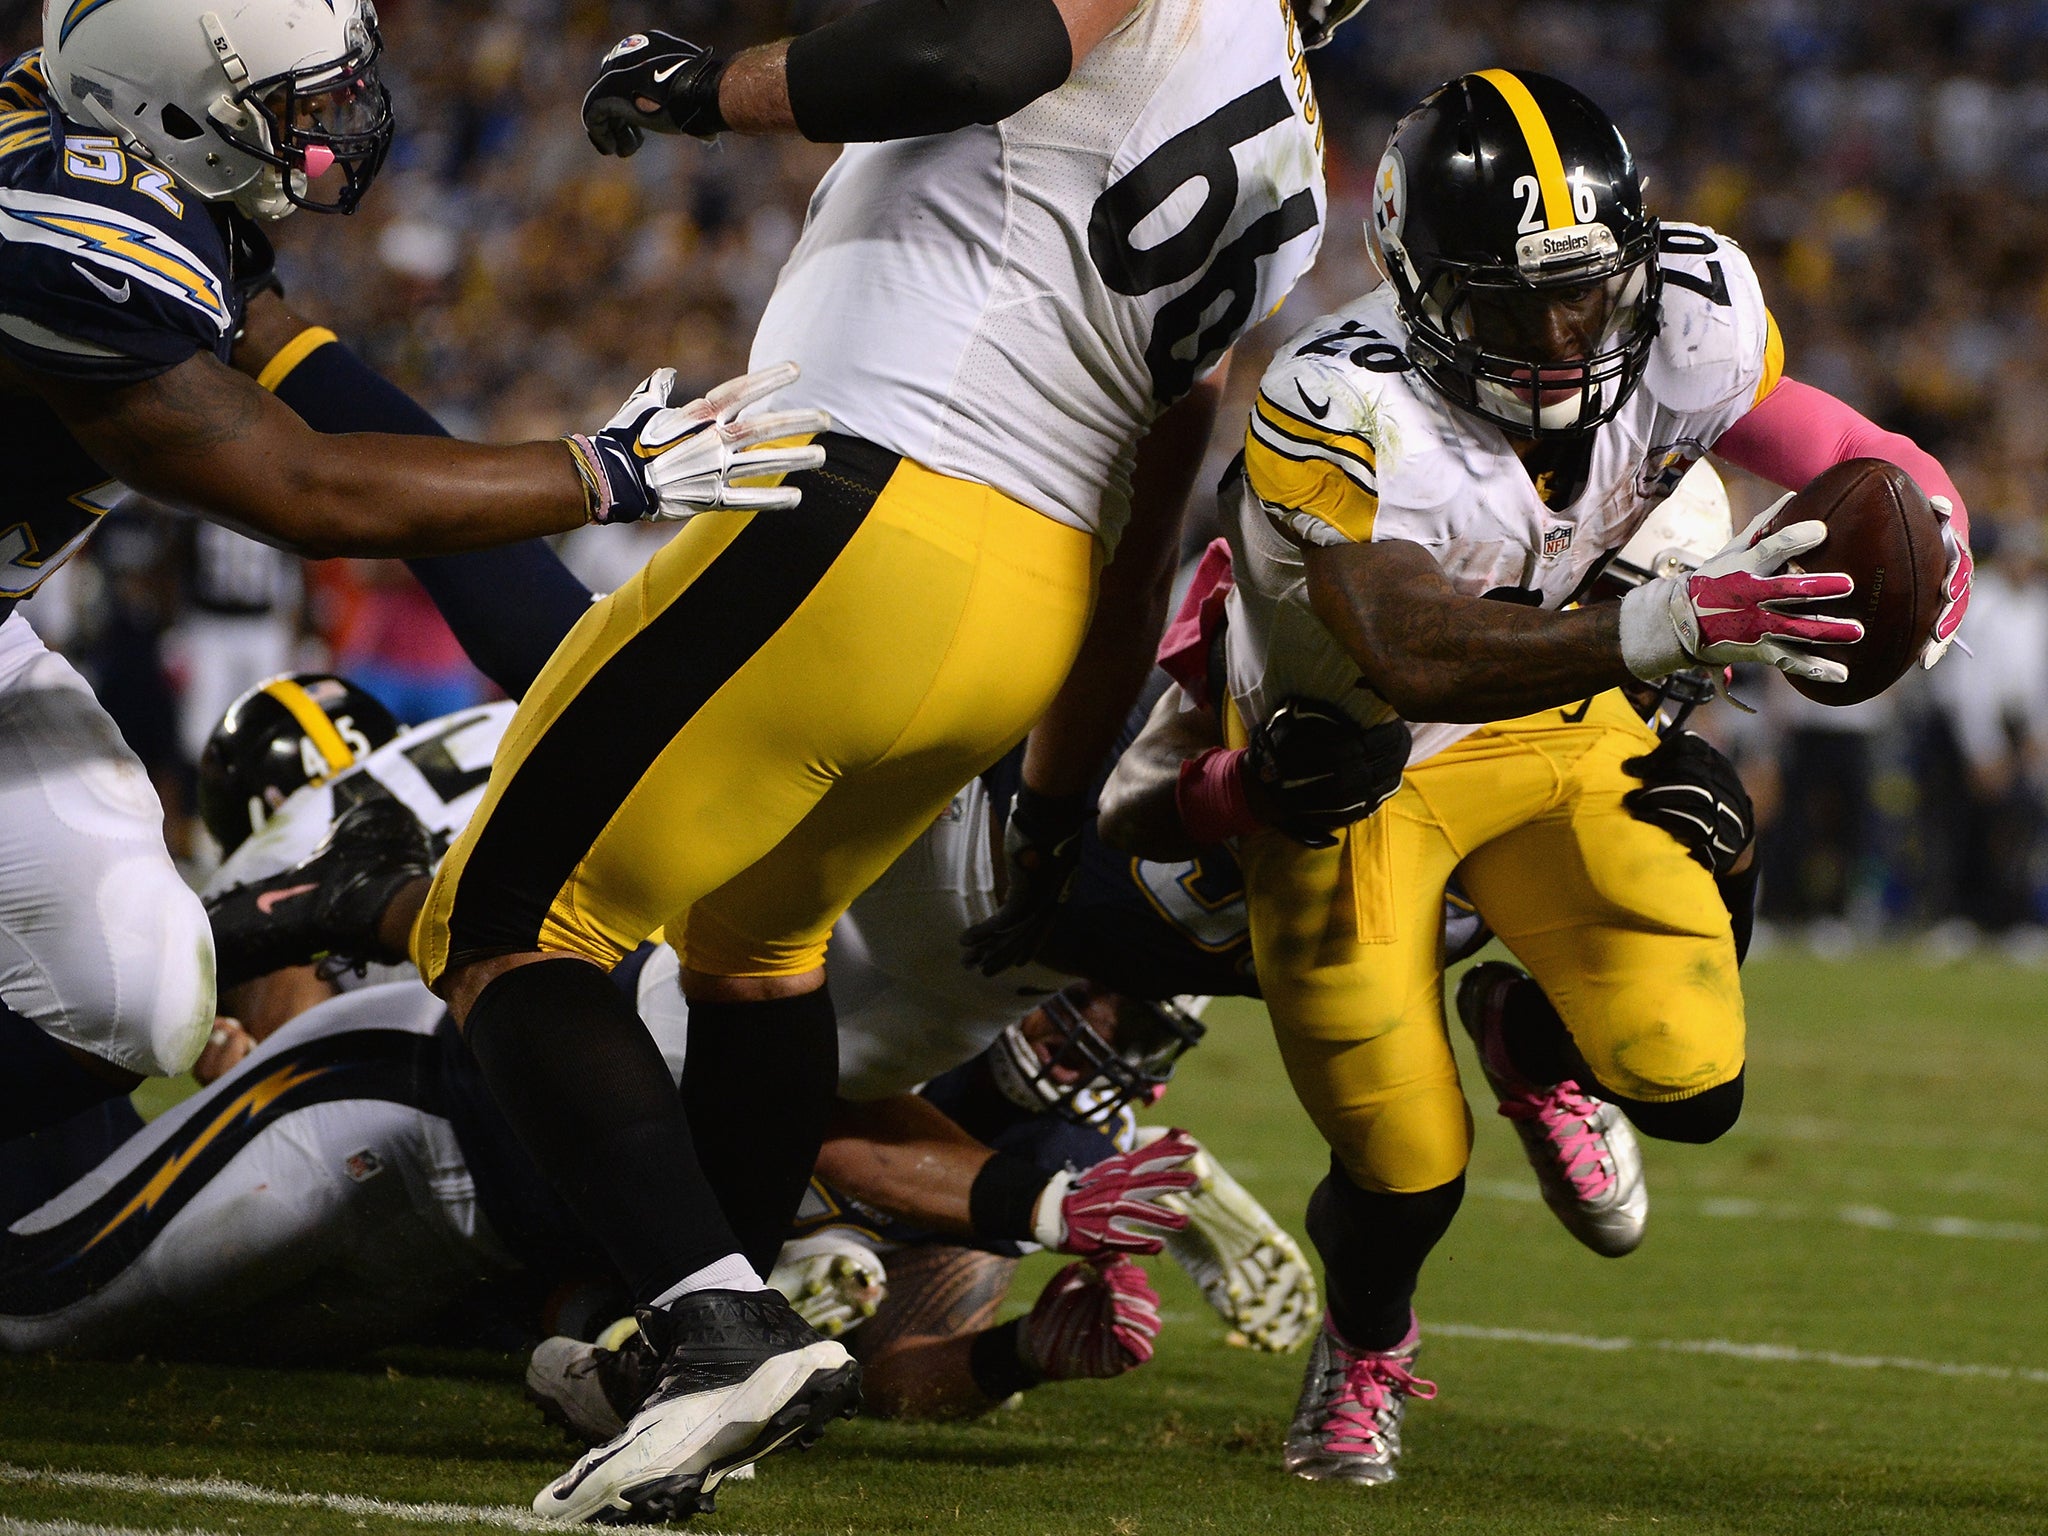 San Diego Chargers vs Pittsburgh Steelers: Le'Veon Bell scores